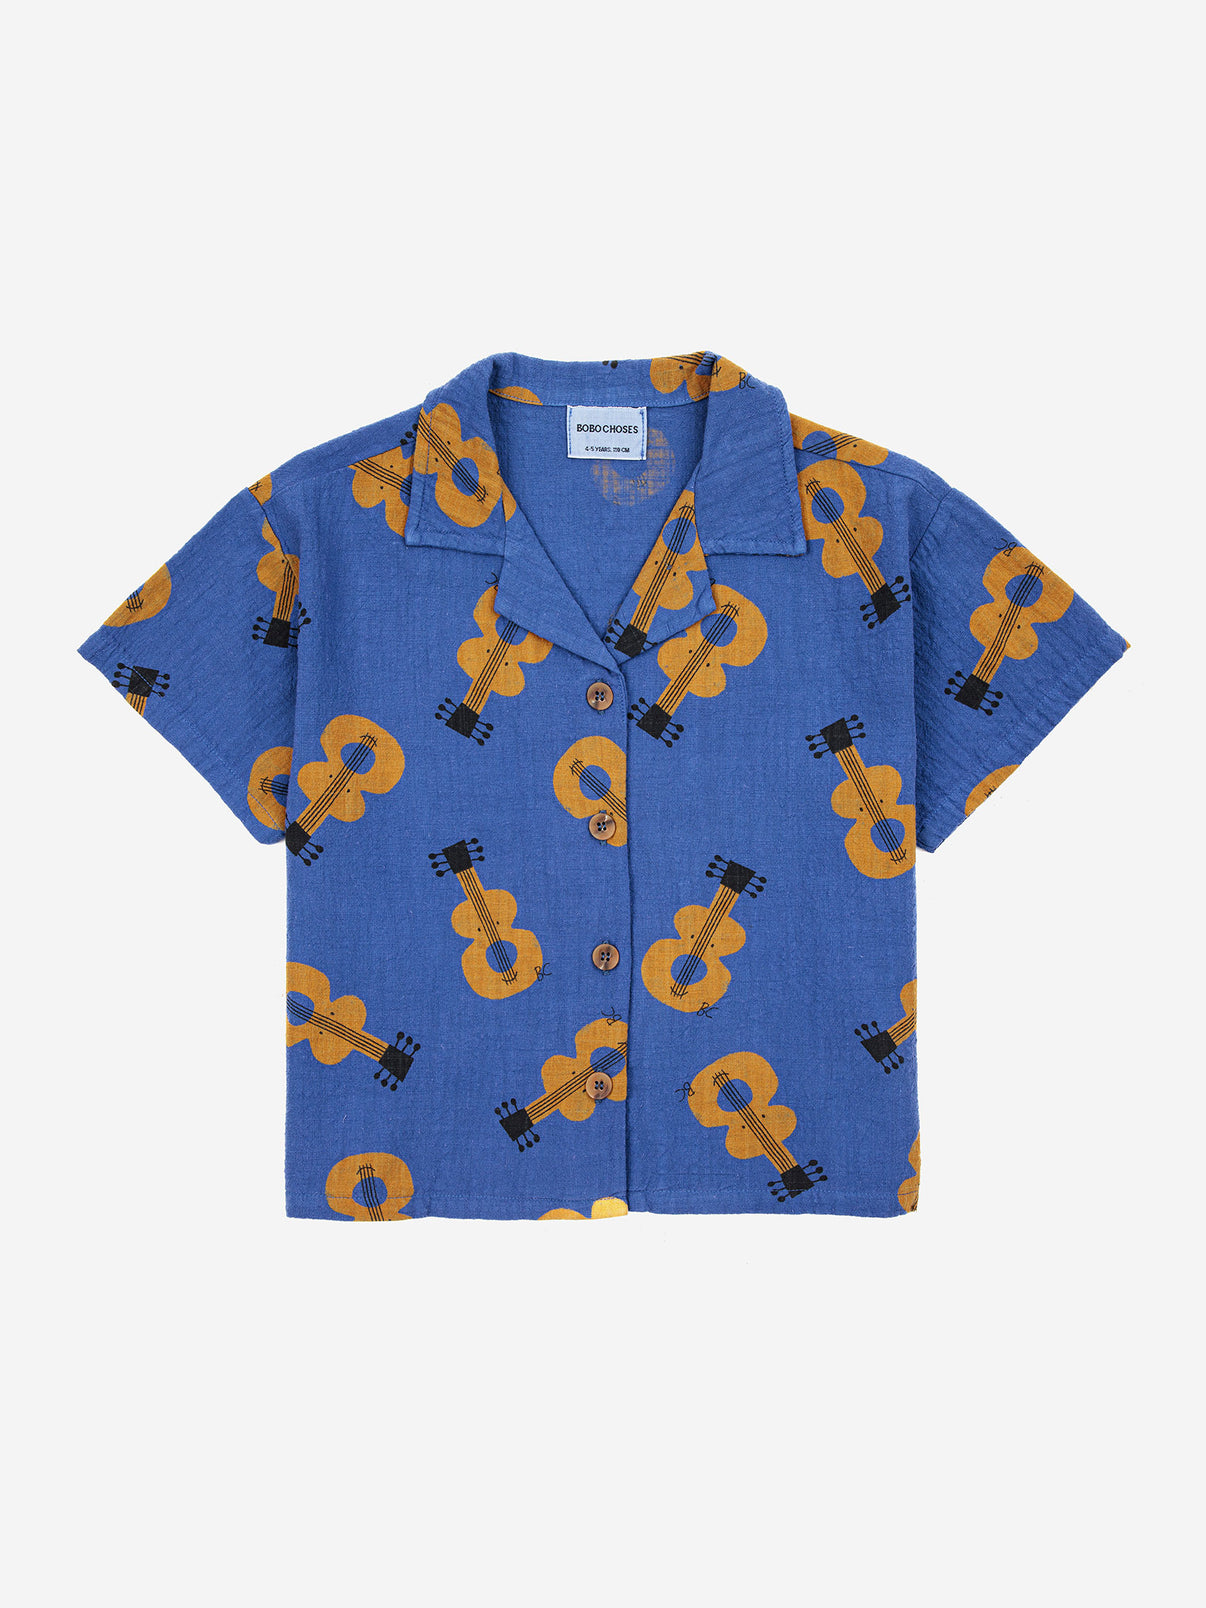 Bobo Choses Acoustic Guitar All Over Woven Button Up Shirt. 